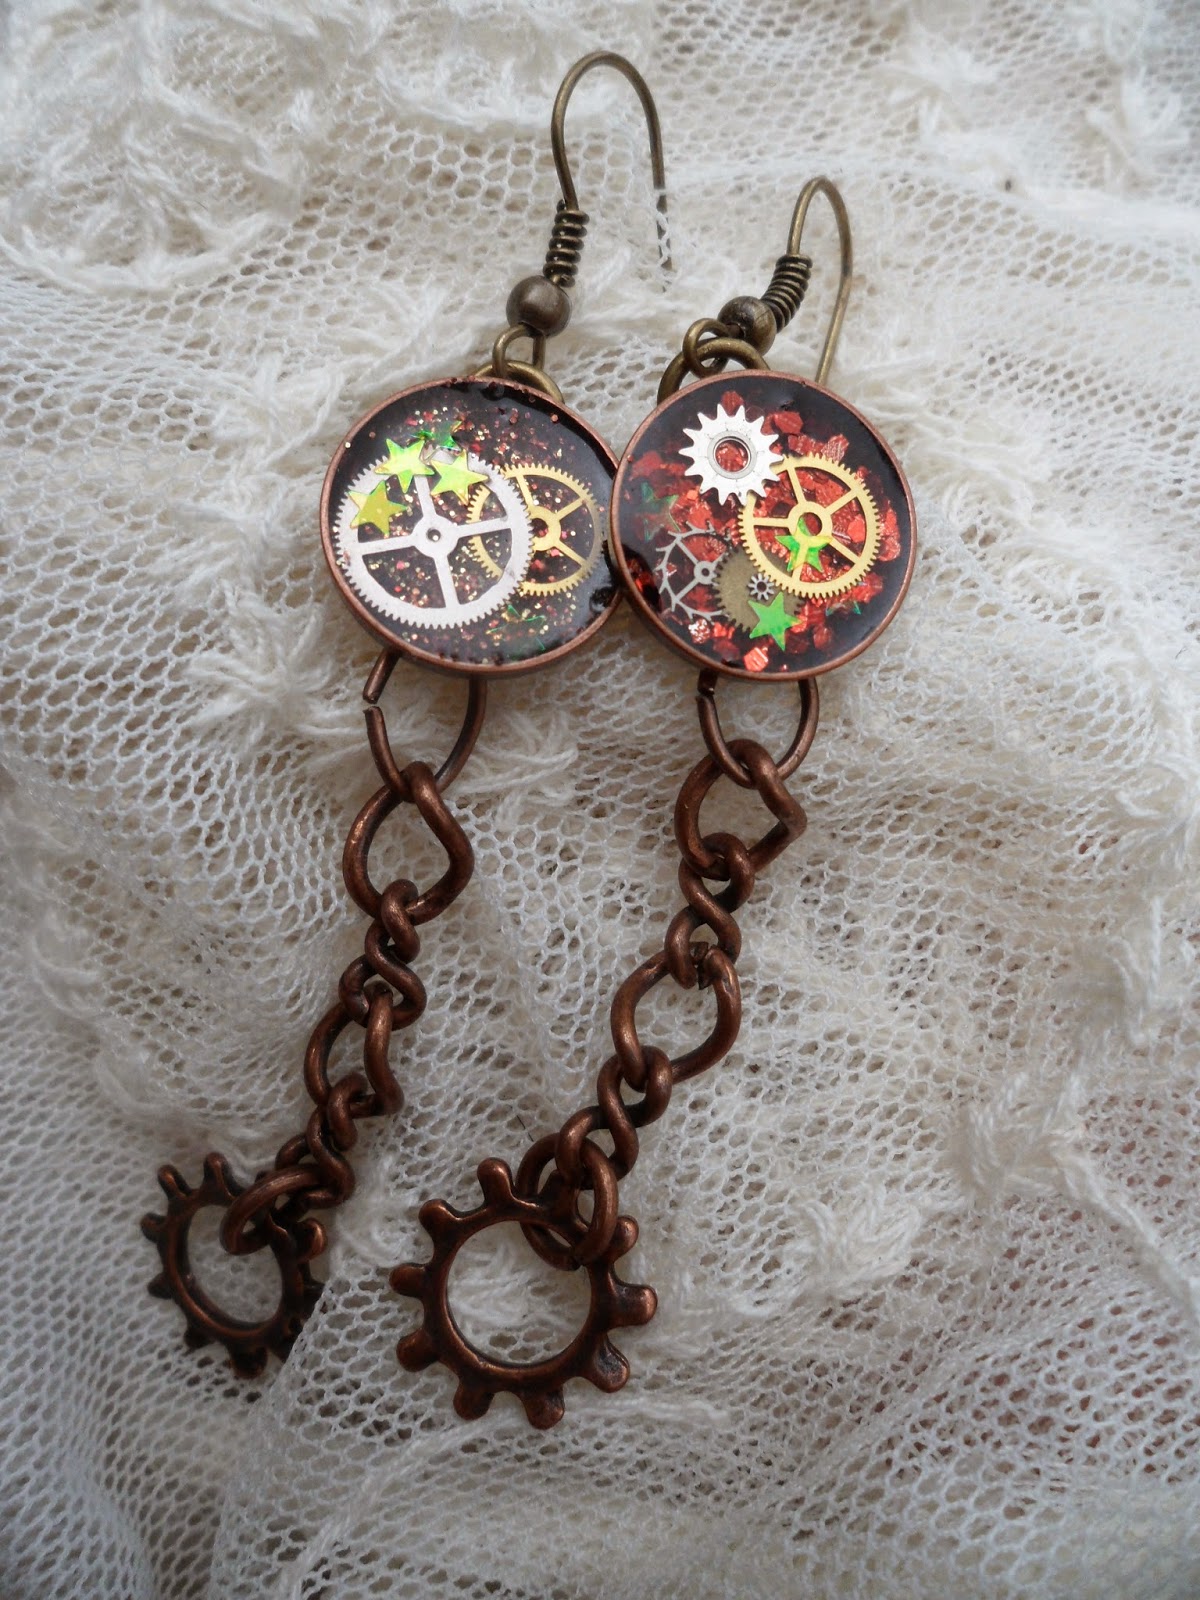 https://www.etsy.com/listing/195762600/timely-affair-resin-steampunk-earring?ref=shop_home_active_1